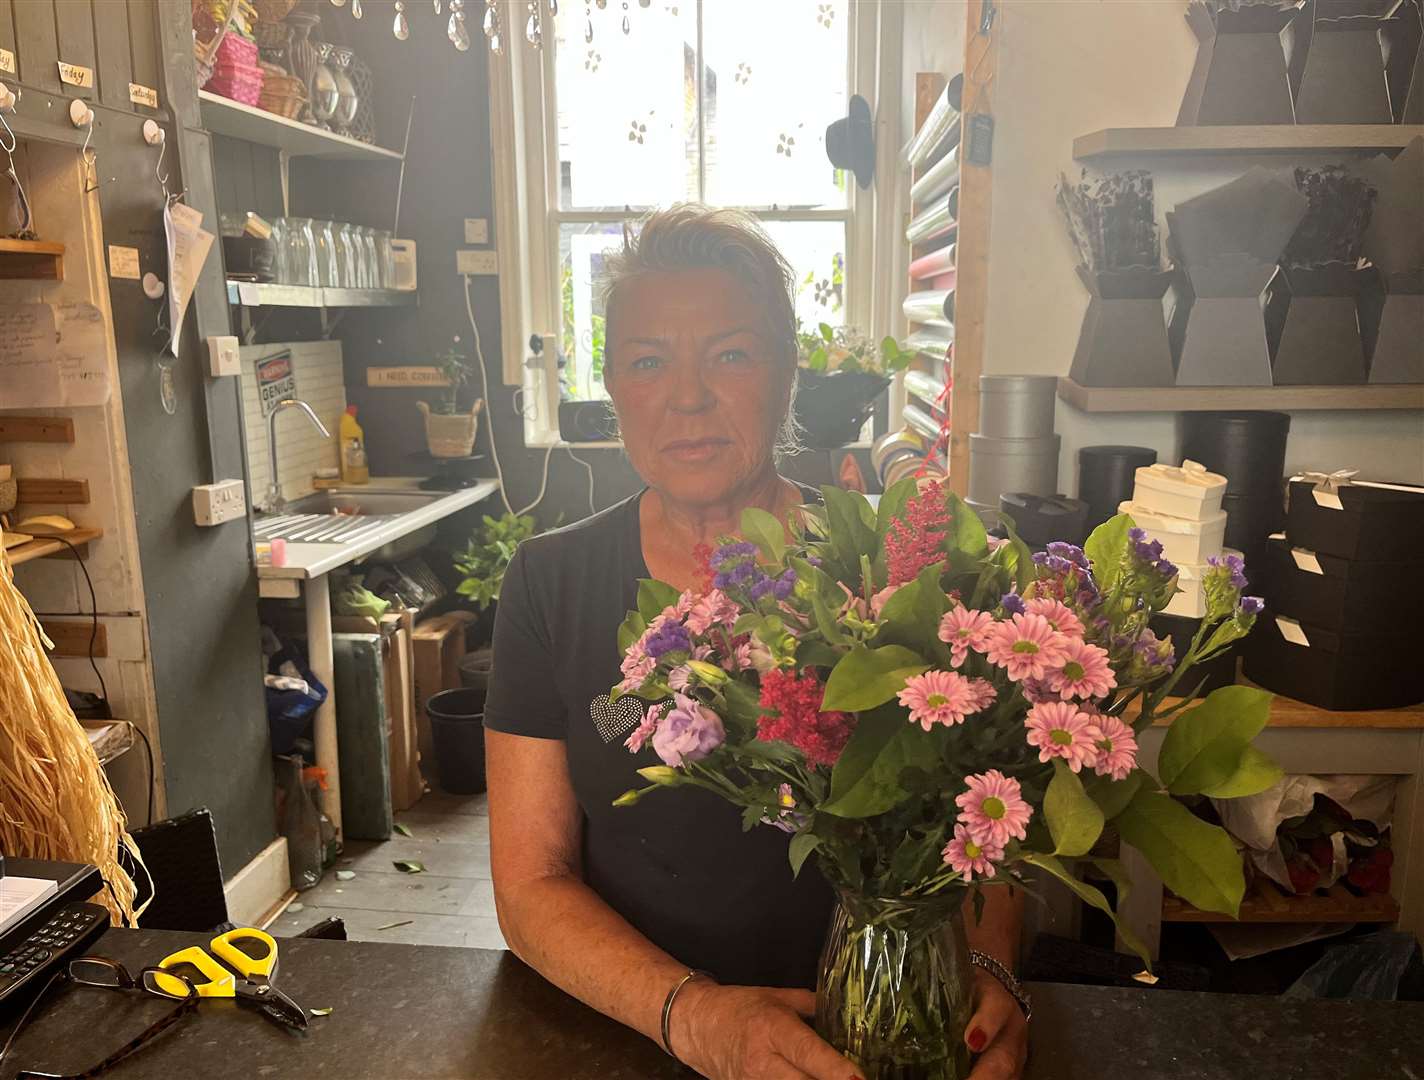 Marie at D&G Florist in East Street says parking is an ongoing issue in the town